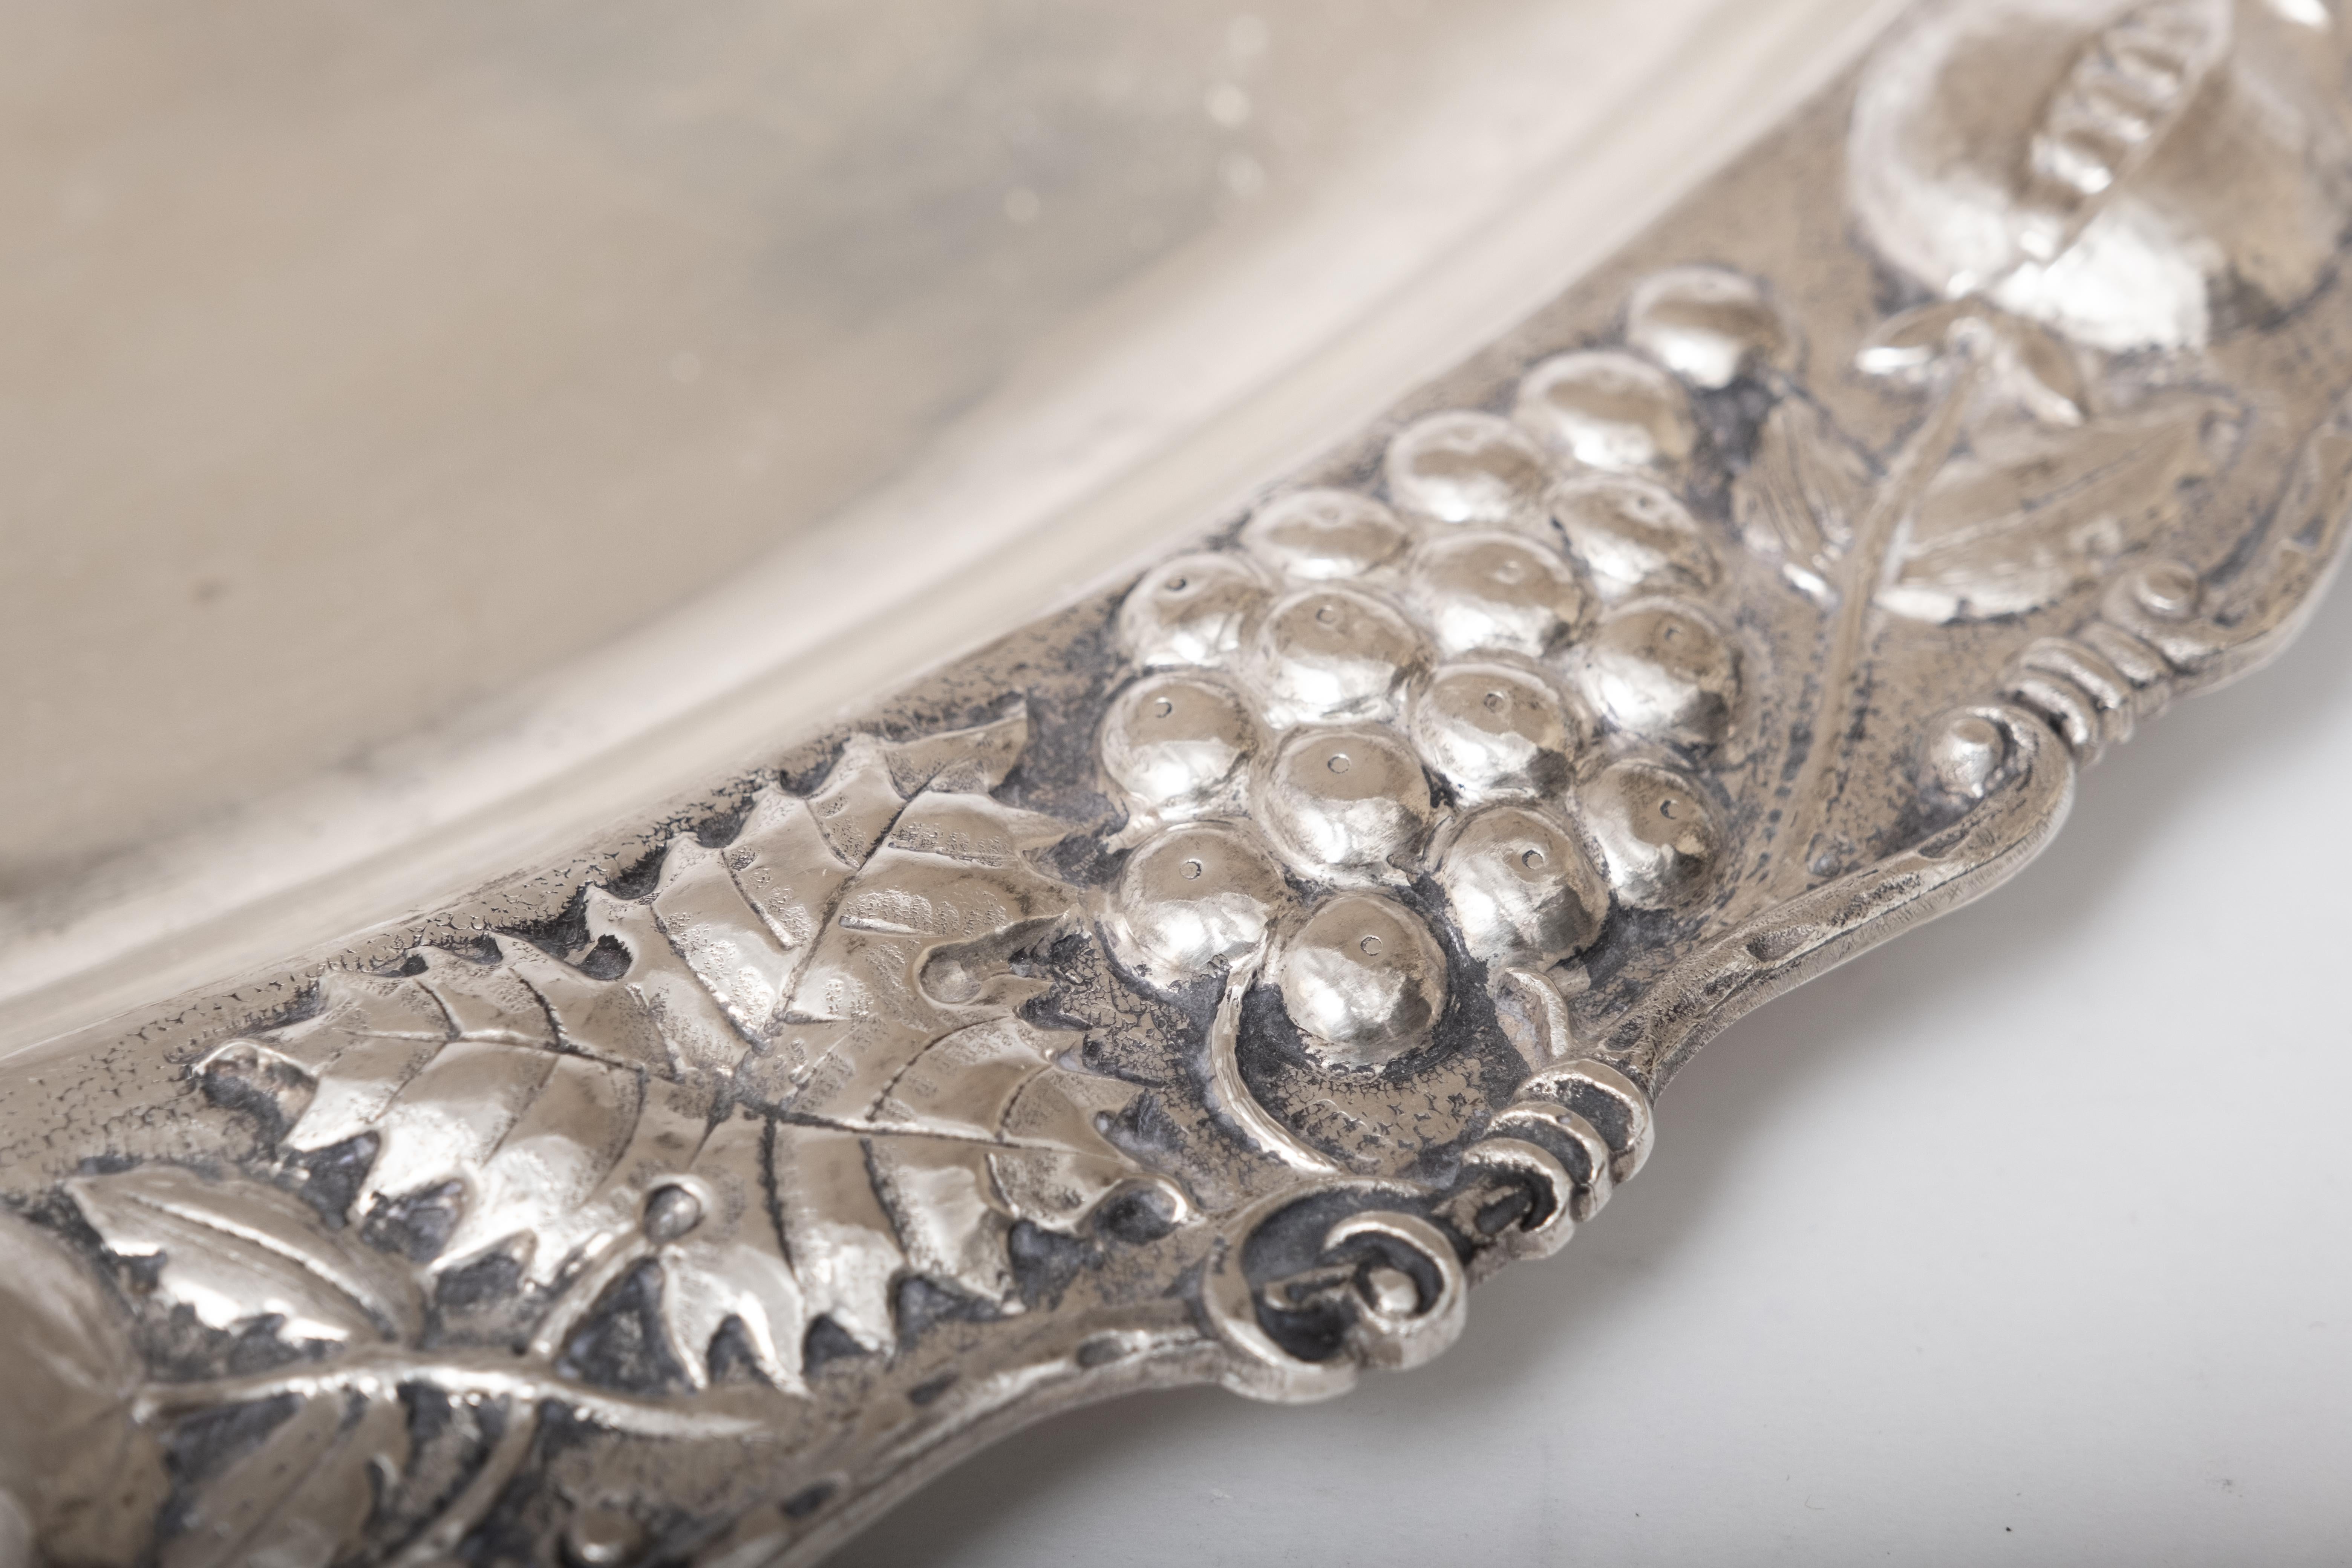 Presenting a beautifully crafted 900 grade silver platter, showcasing a captivating repoussé design along its edges. This artistic motif features an array of intricate flowers framed by a curvilinear grape vine pattern, adding an elegant touch to